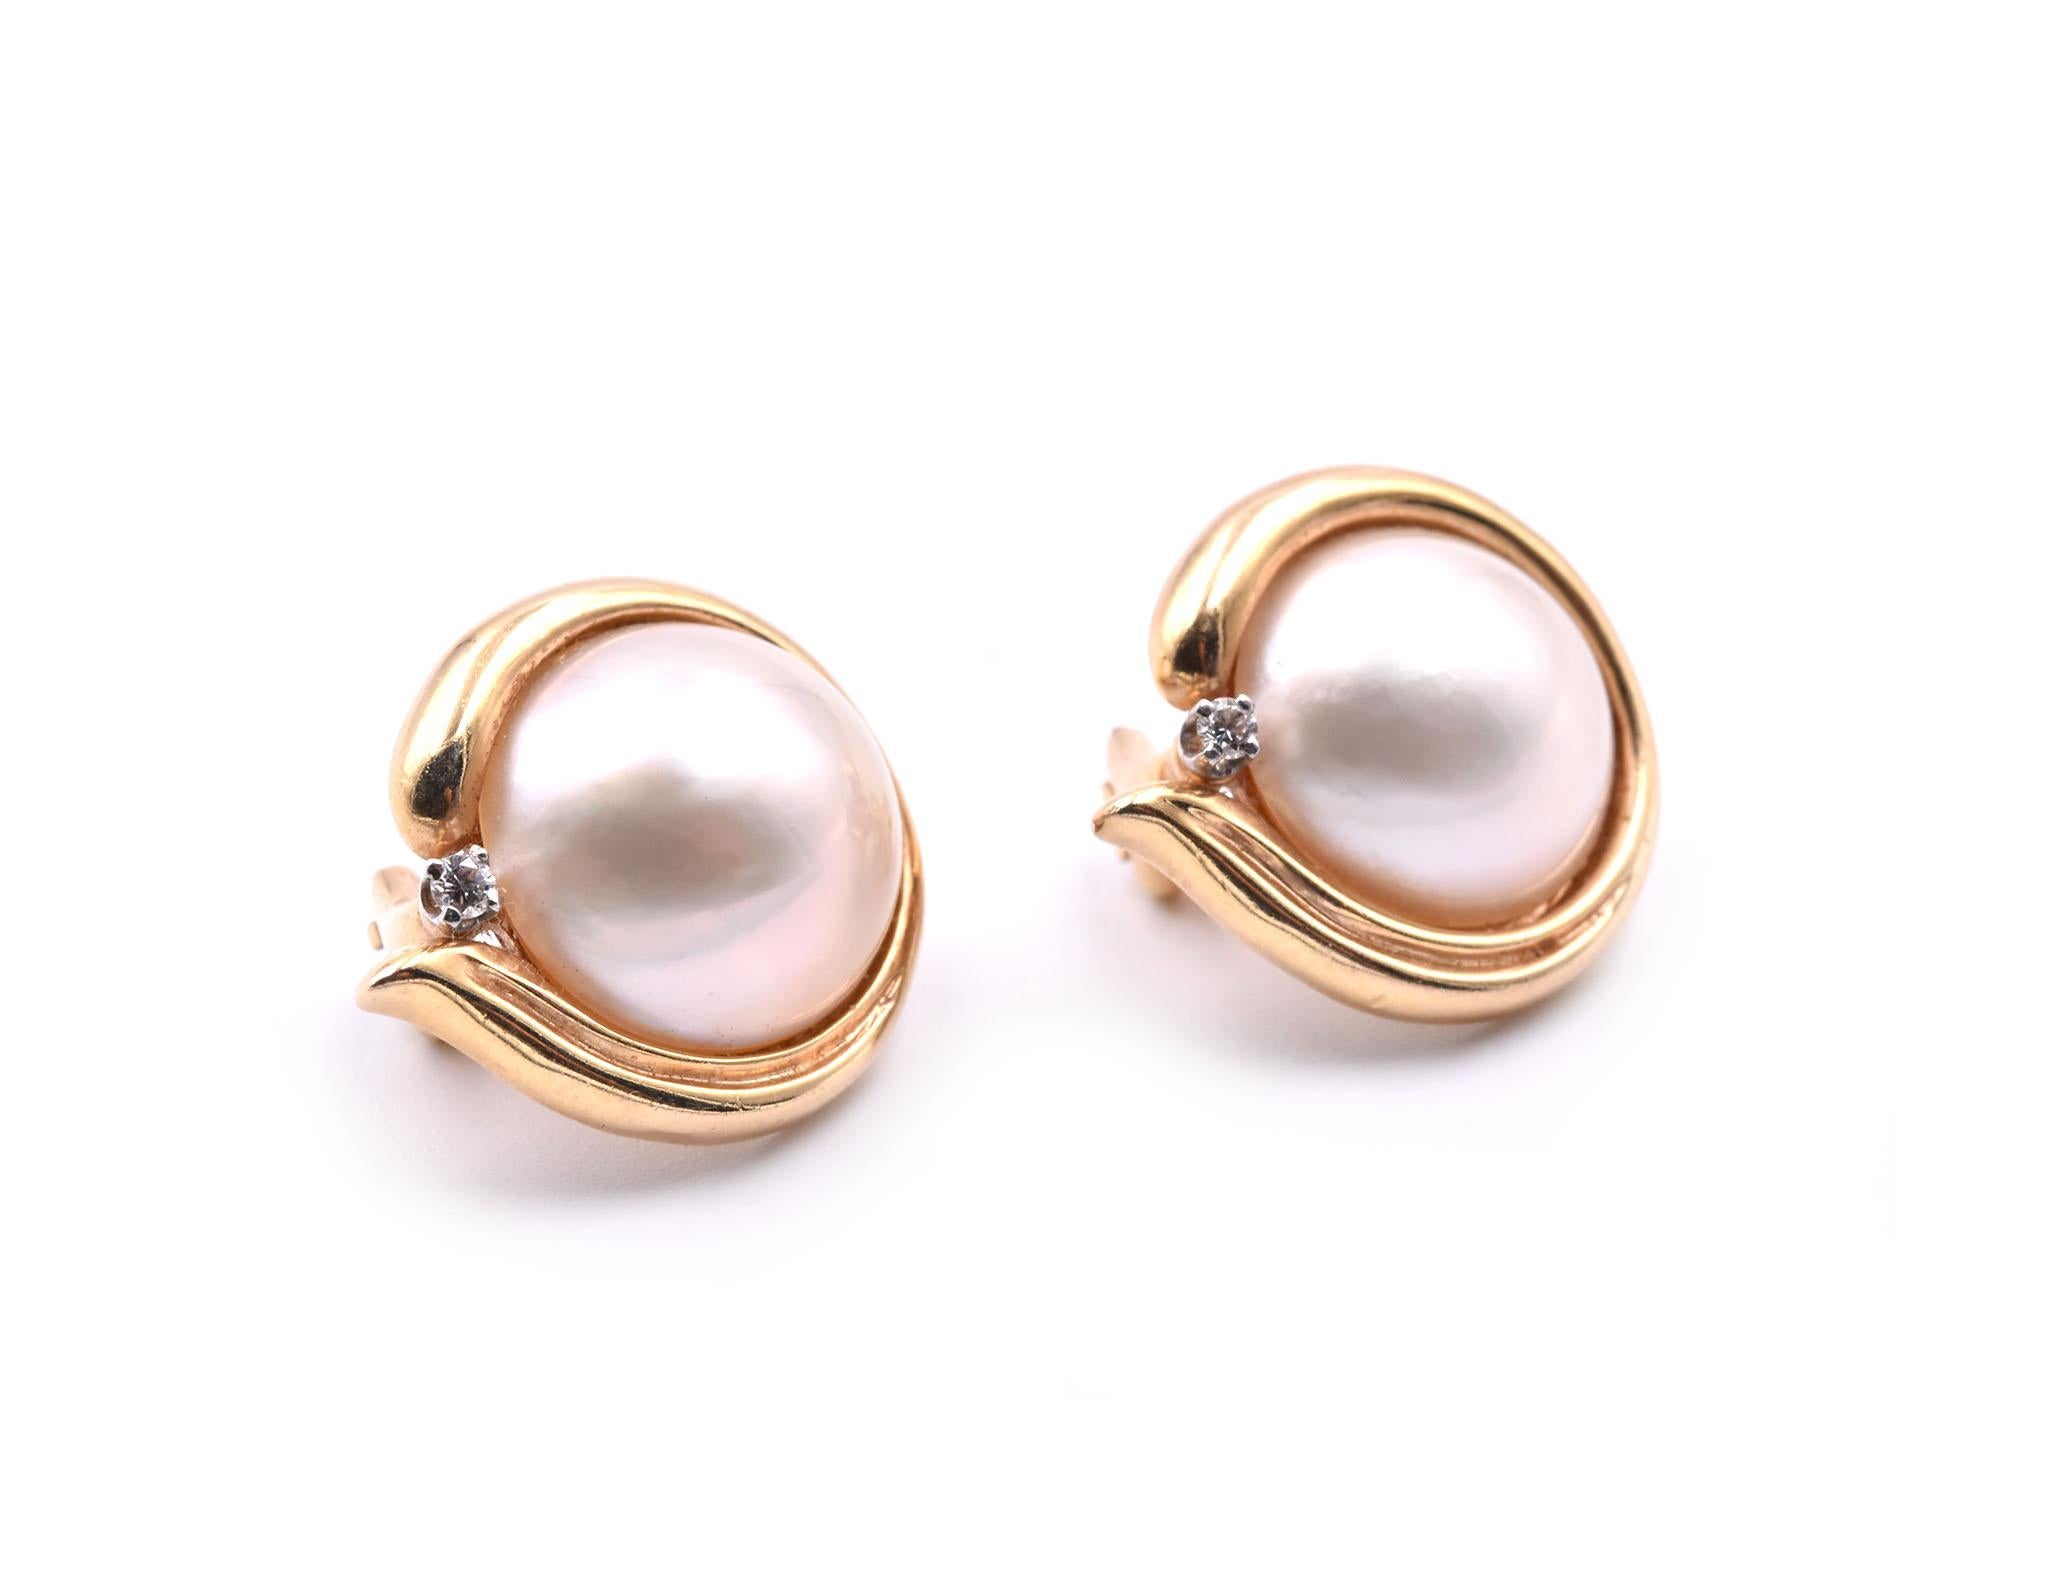 Designer: custom design
Material: 14k yellow gold
Pearls: 2 Mabe pearls approximately 12.5mm
Diamonds: 2 round brilliant cut= .03cttw
Fastenings: clip-on backs
Weight: 8.30 grams
